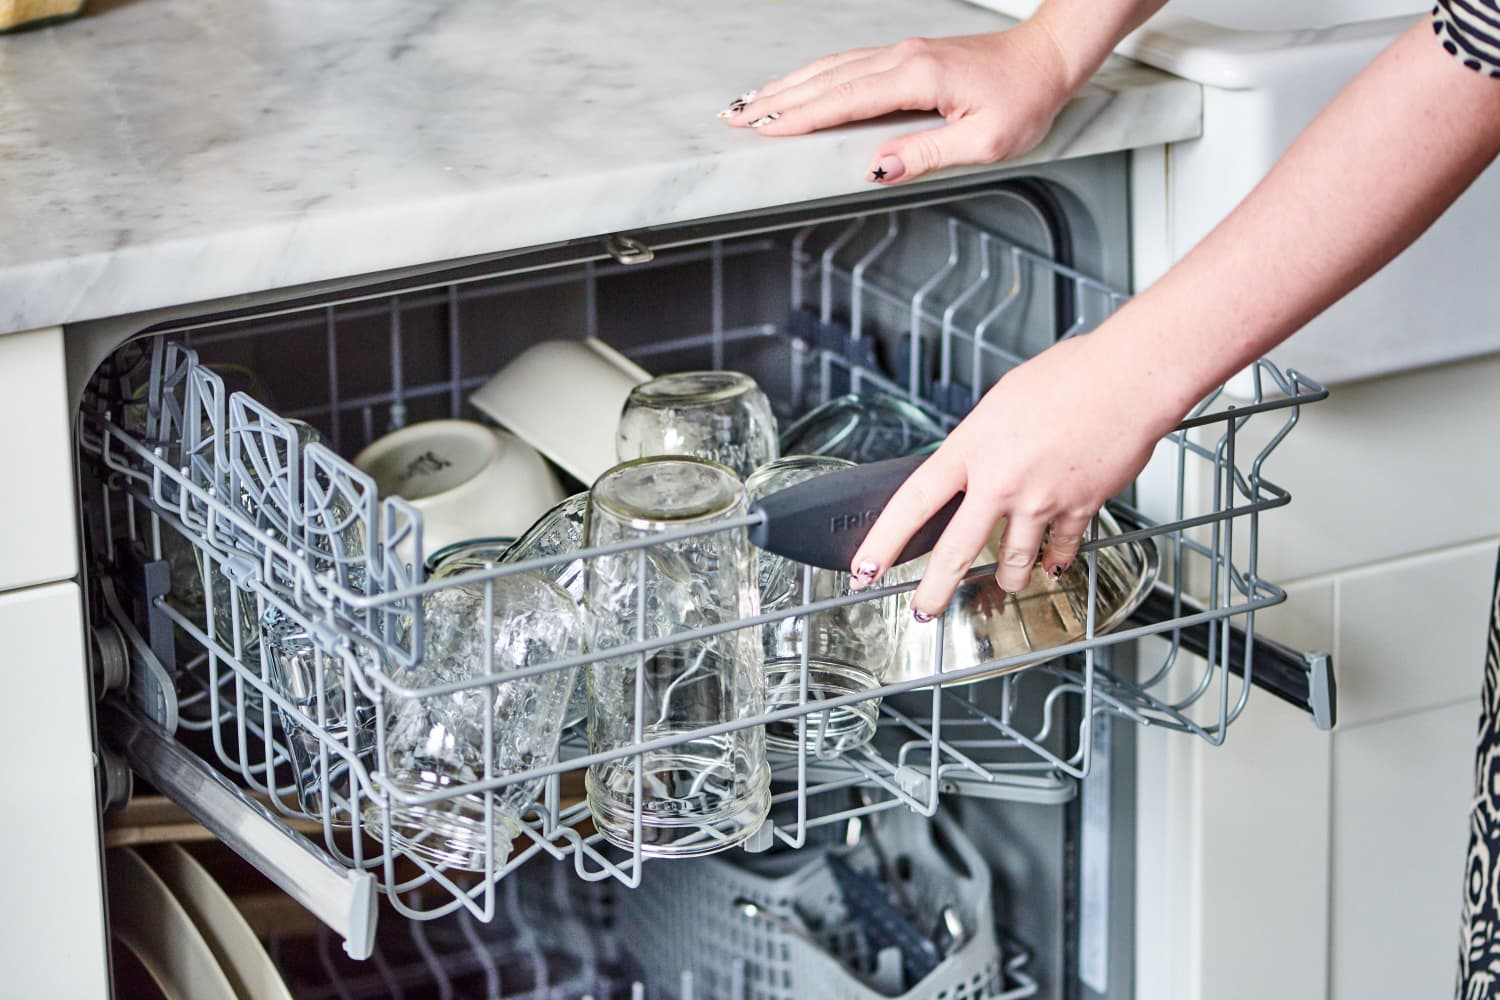 Ought to I Actually Put Aluminum Foil In The Dishwasher?